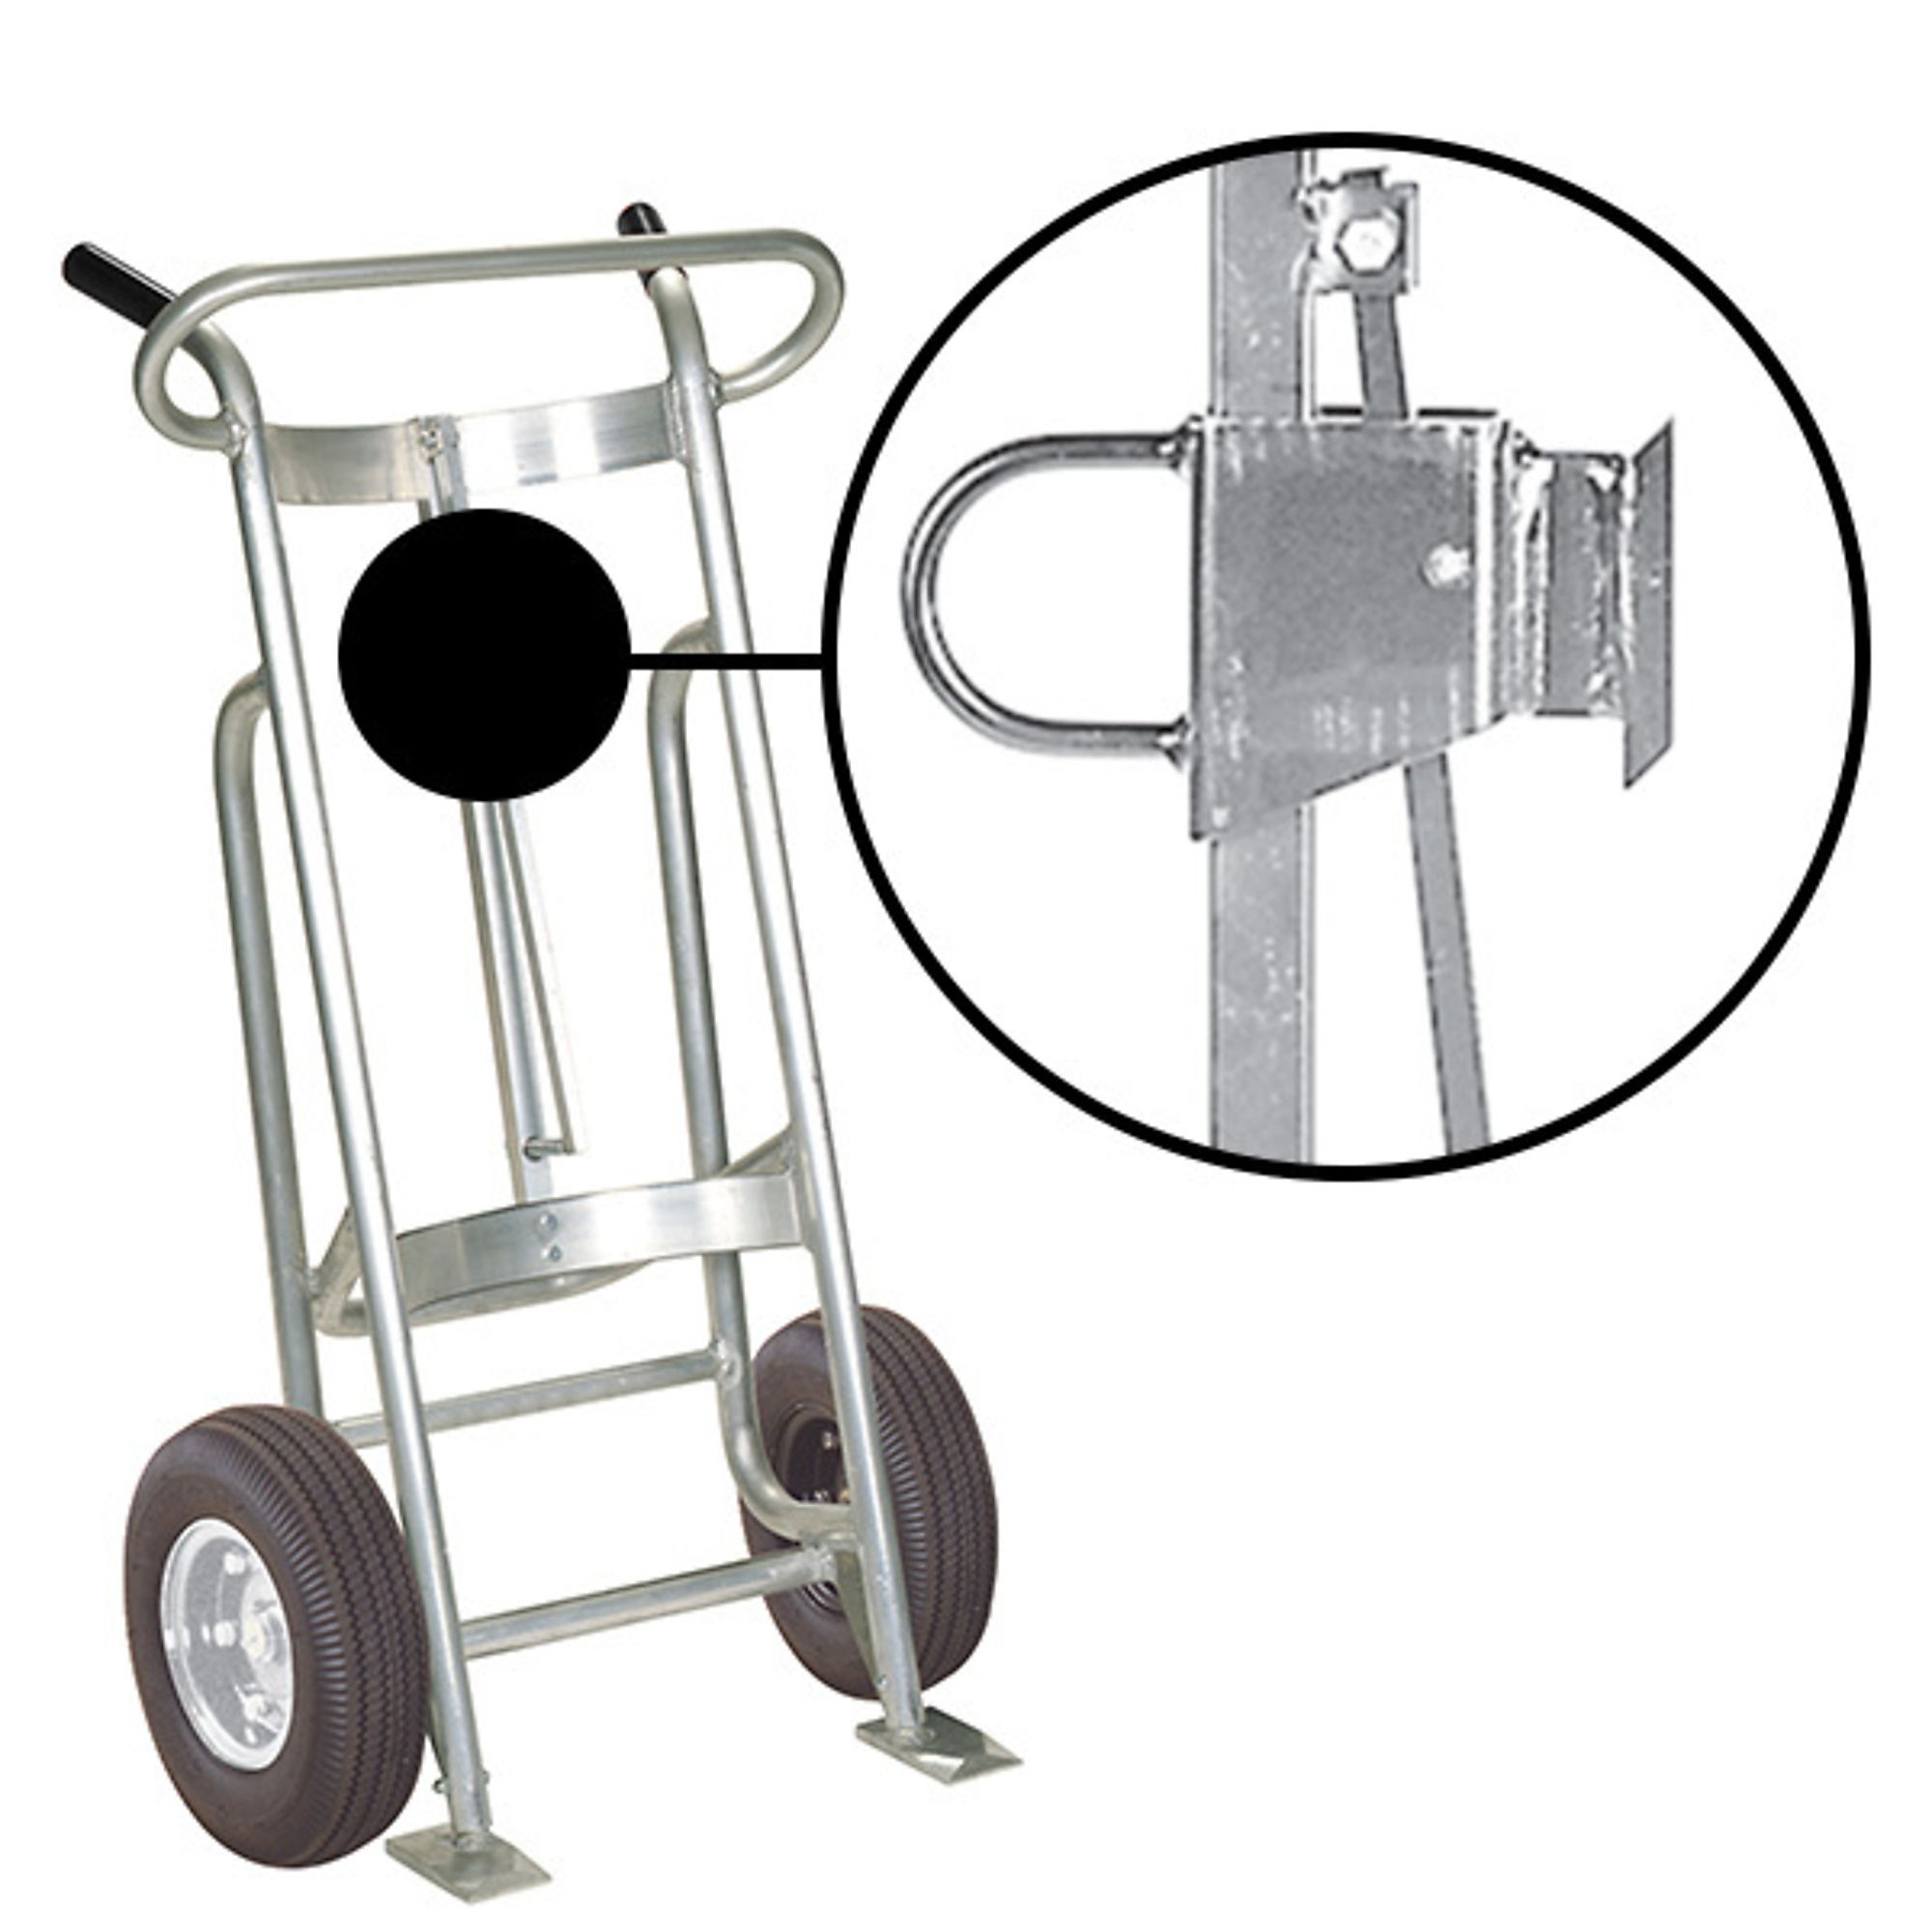 Valley Craft, 2-Wheel Drum Hand Truck, Load Capacity 1000 lb, Height 52 in, Material Aluminum, Model F81500A0F